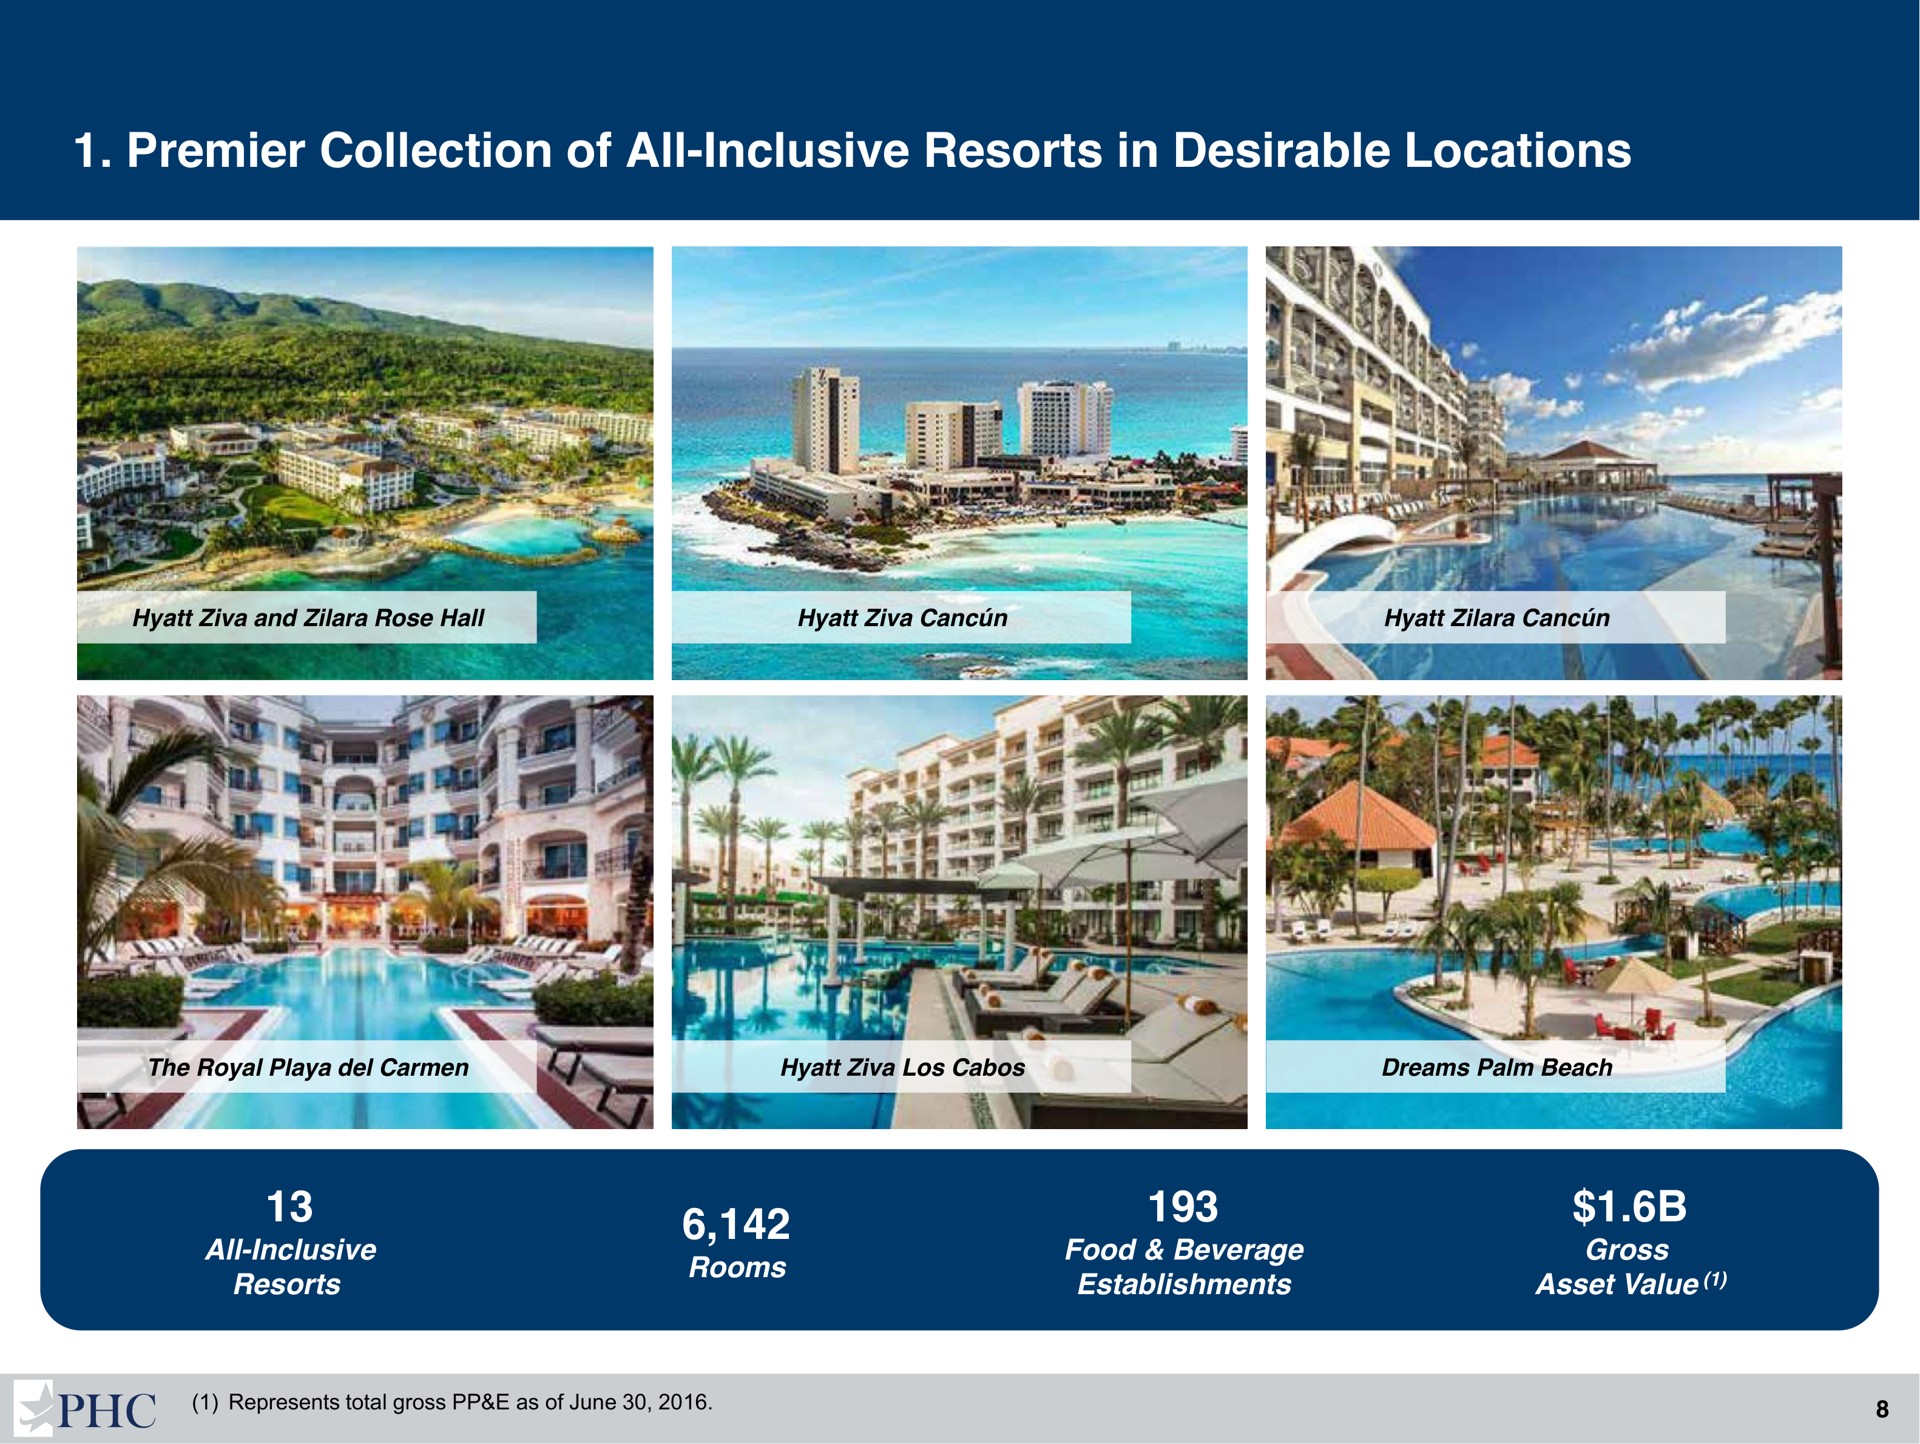 premier collection of all inclusive resorts in desirable locations | Playa Hotels